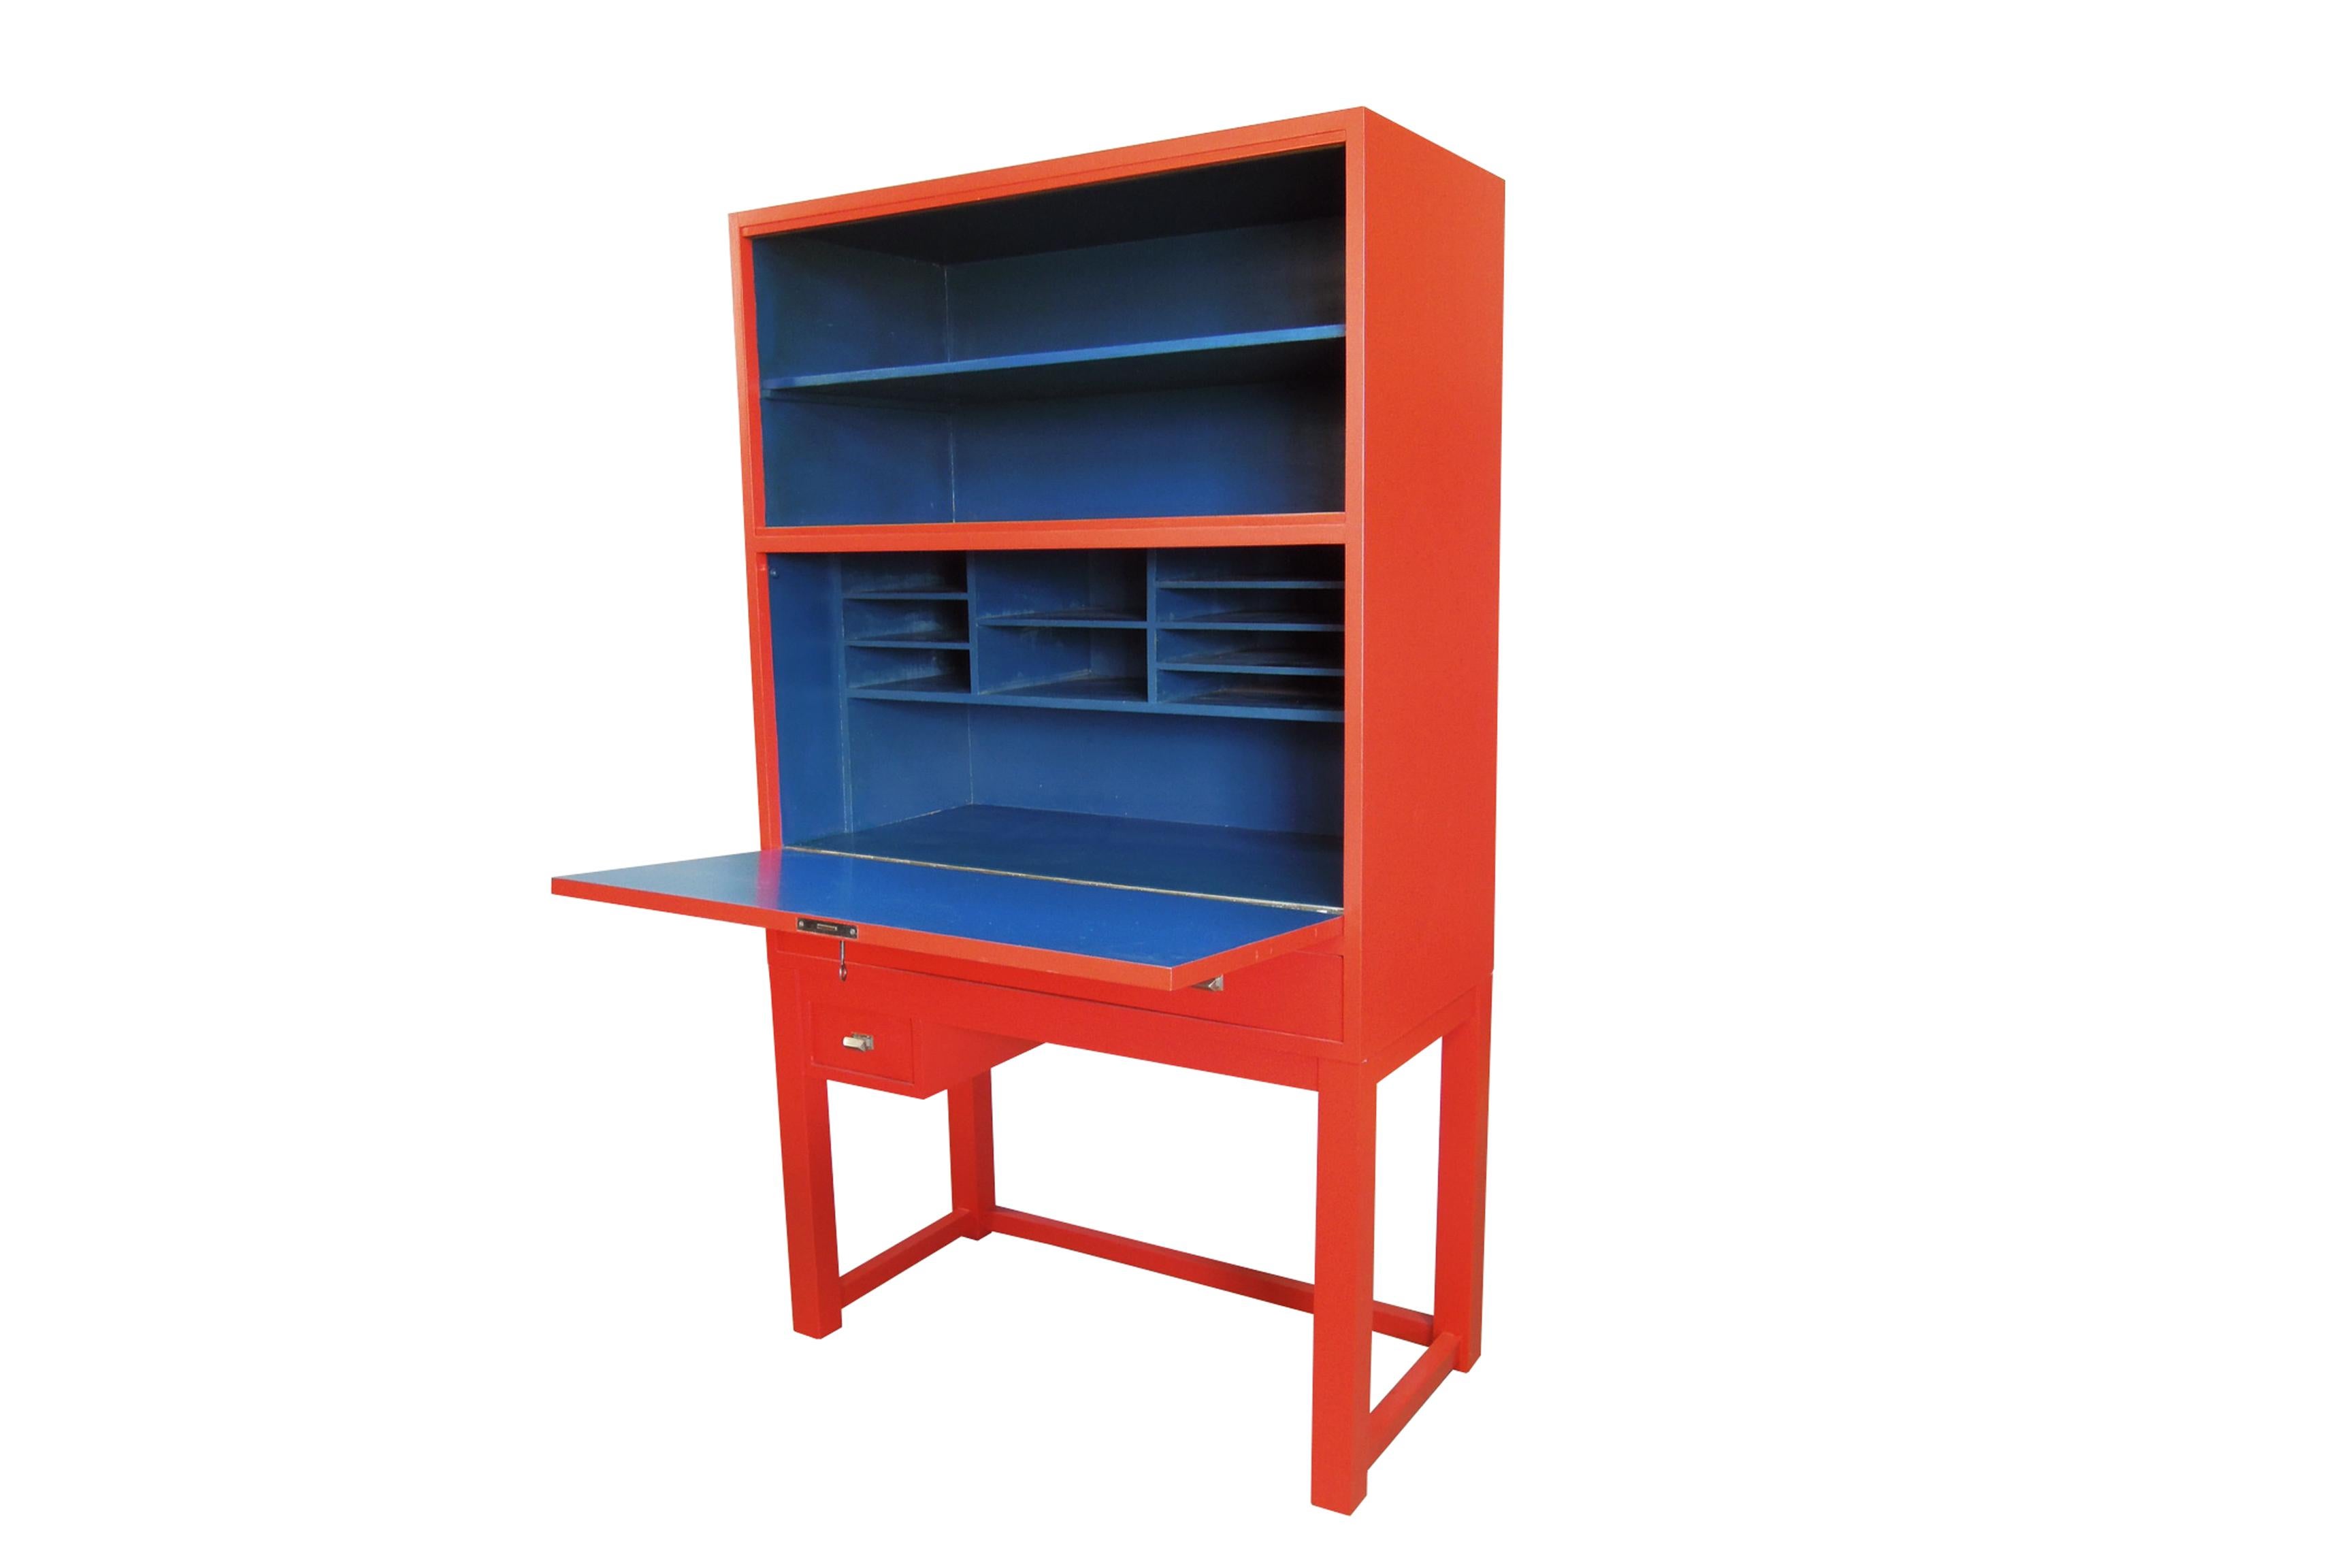 The red and blue colors are the original combination. The exterior of the cabinet is bright red with a vivid blue interior, creating an impactful visual contrast. No-one can miss the oriental design influence on this unusual tall modernist cabinet;